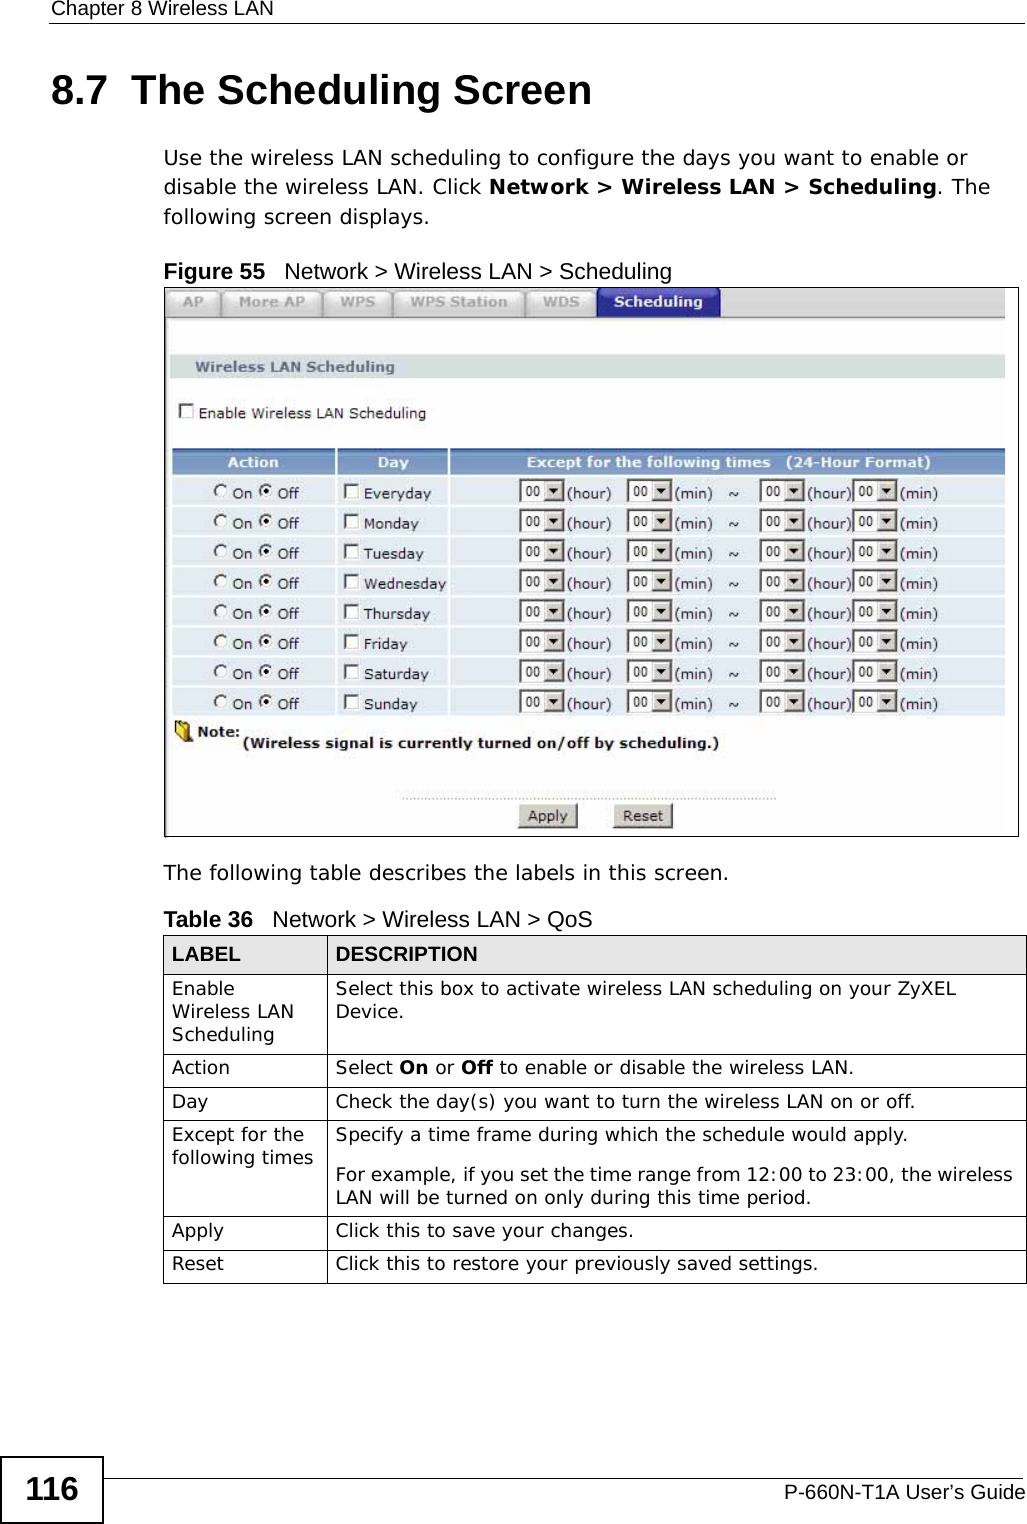 Chapter 8 Wireless LANP-660N-T1A User’s Guide1168.7  The Scheduling ScreenUse the wireless LAN scheduling to configure the days you want to enable or disable the wireless LAN. Click Network &gt; Wireless LAN &gt; Scheduling. The following screen displays.Figure 55   Network &gt; Wireless LAN &gt; SchedulingThe following table describes the labels in this screen.Table 36   Network &gt; Wireless LAN &gt; QoSLABEL DESCRIPTIONEnable Wireless LAN SchedulingSelect this box to activate wireless LAN scheduling on your ZyXEL Device.Action Select On or Off to enable or disable the wireless LAN.Day Check the day(s) you want to turn the wireless LAN on or off.Except for the following times Specify a time frame during which the schedule would apply.For example, if you set the time range from 12:00 to 23:00, the wireless LAN will be turned on only during this time period.Apply Click this to save your changes.Reset Click this to restore your previously saved settings.